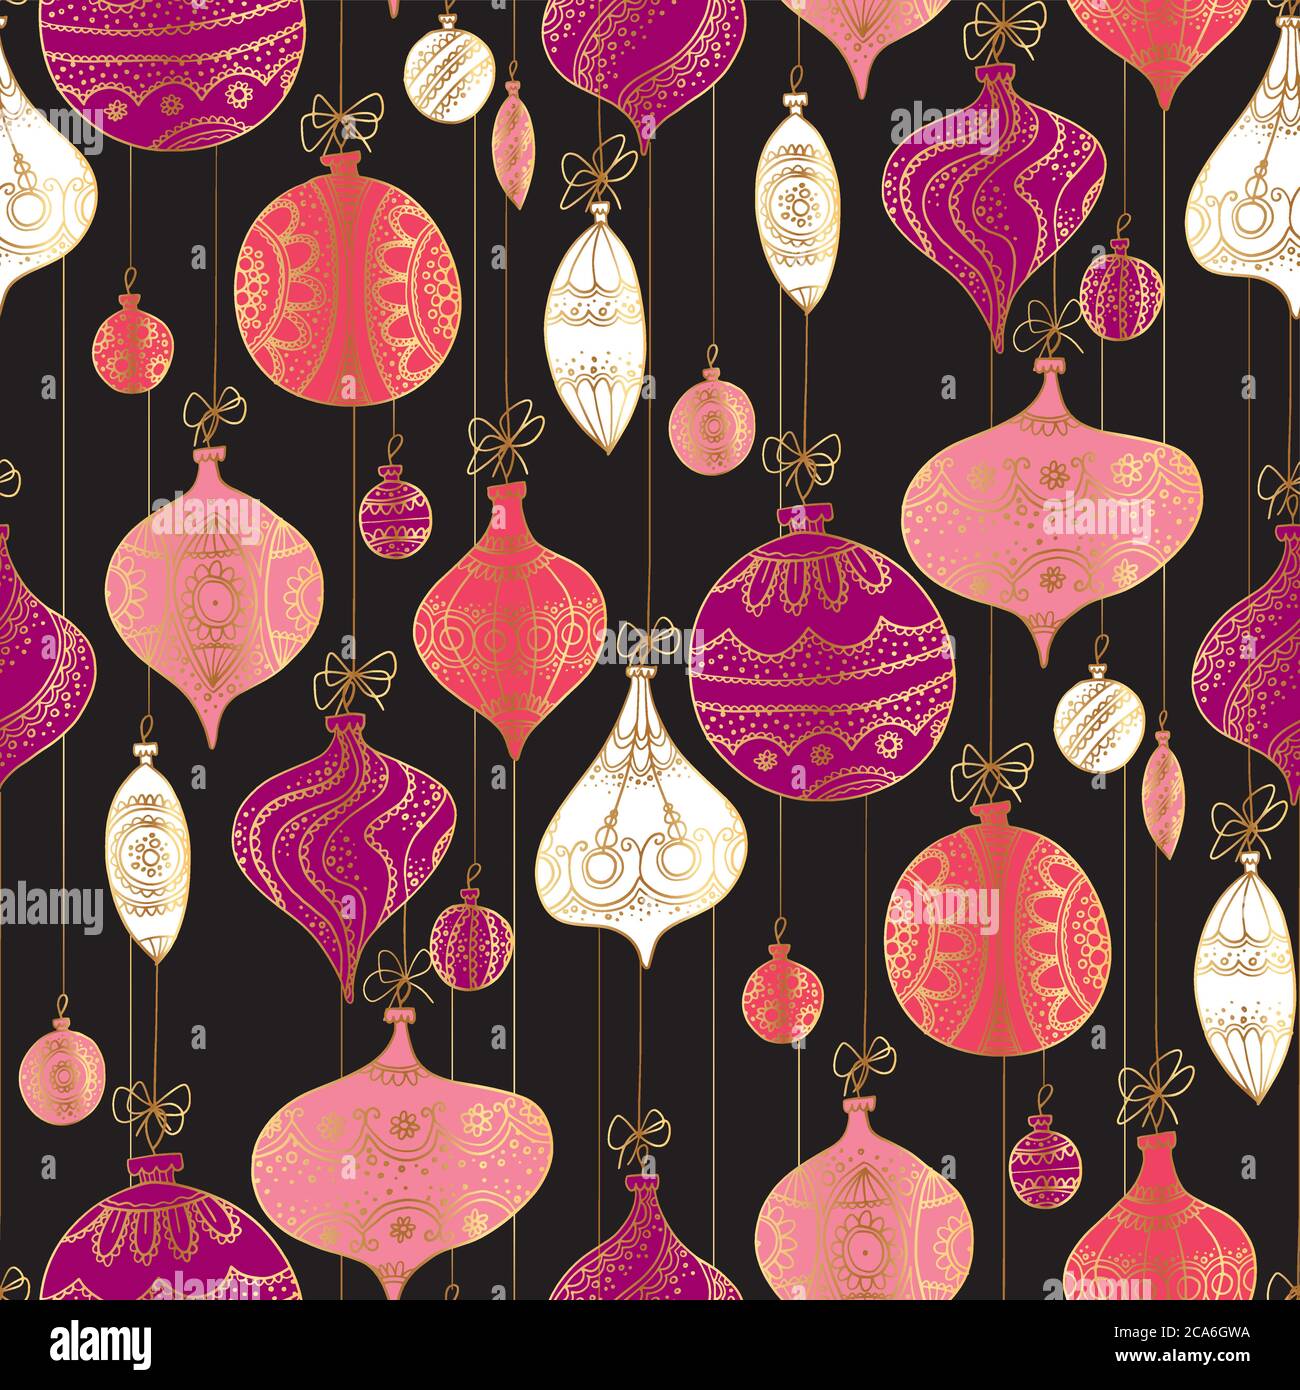 Decorative xmas vintage bauble on black background seamless pattern for background, wrap, fabric, textile, wrap, surface, web and print design. Retro Stock Vector